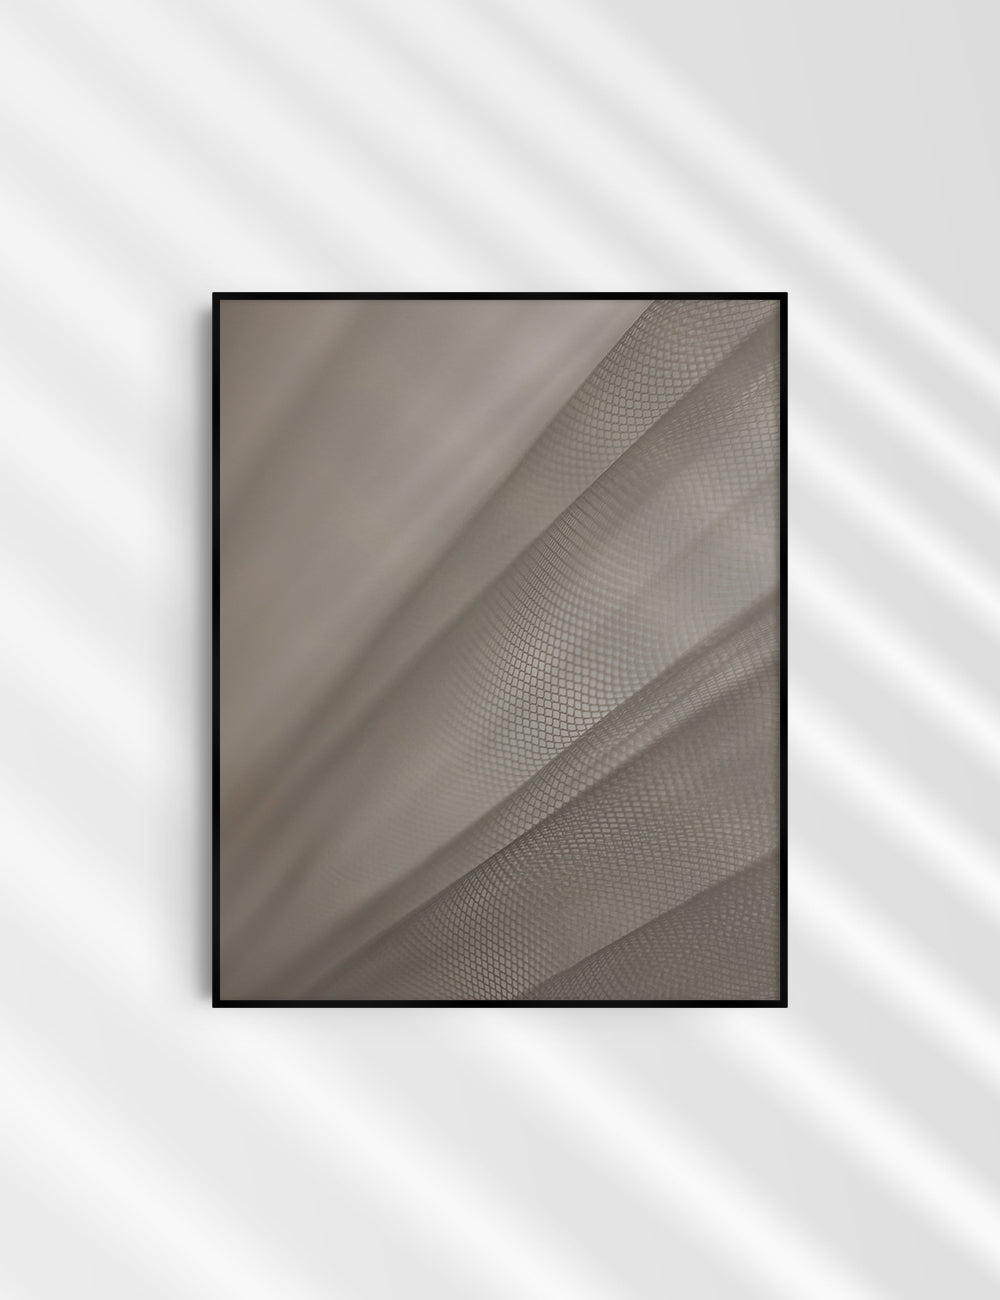 Abstract minimalist photography 1.1 Beige aesthetic. Printable wall art photography. PAPER MOON Art & Design